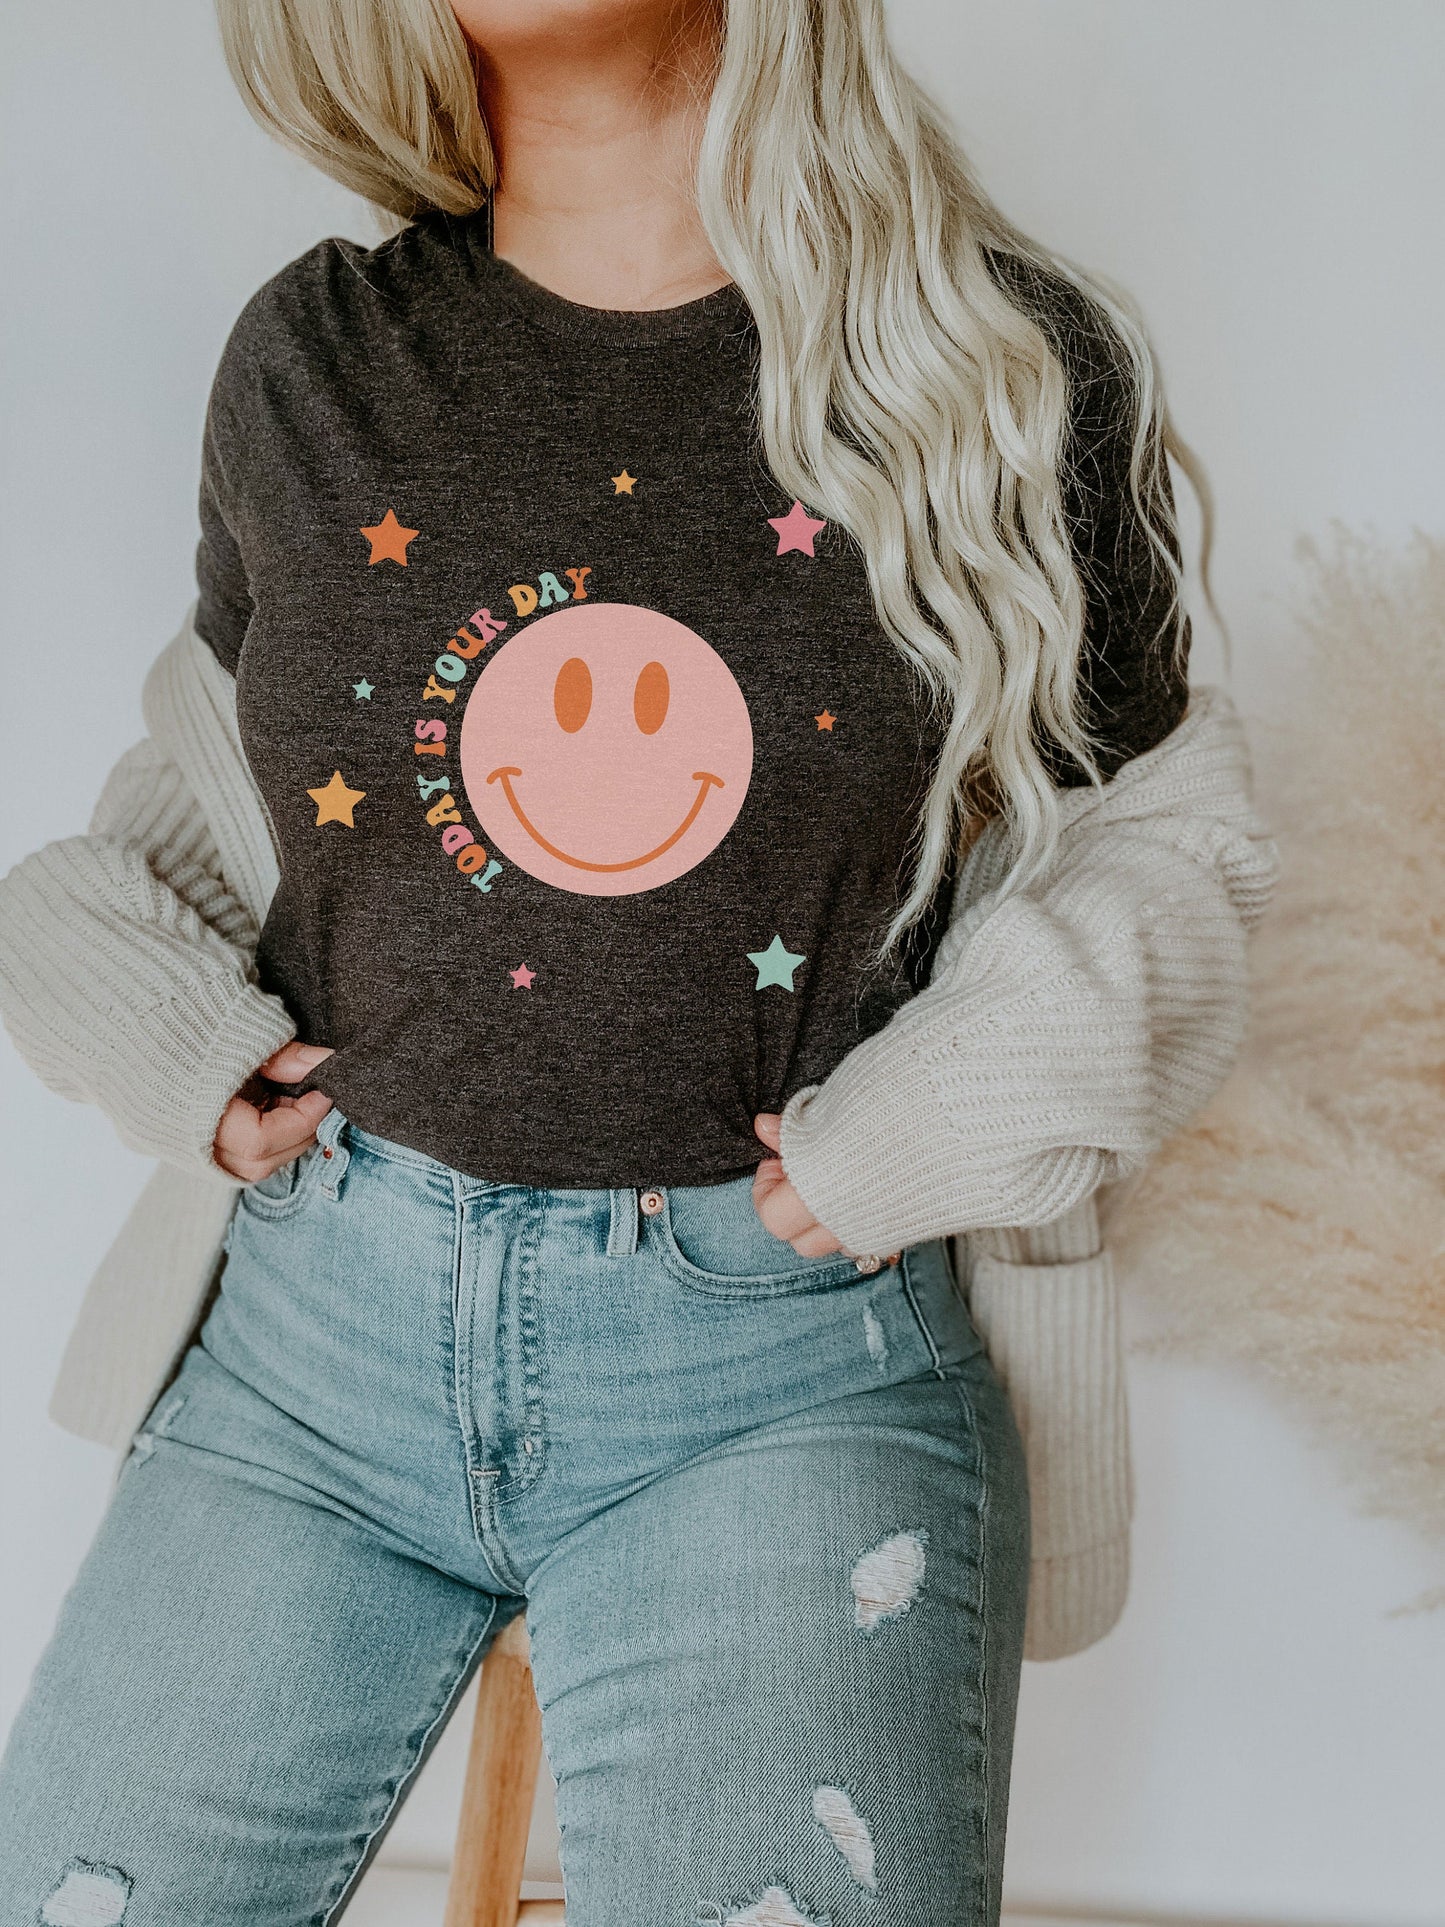 Today Is Your Day Happy Smiley Face Stars Vintage Retro 80's Style Ultra Soft Graphic Tee Unisex Soft Tee T-shirt for Women or Men